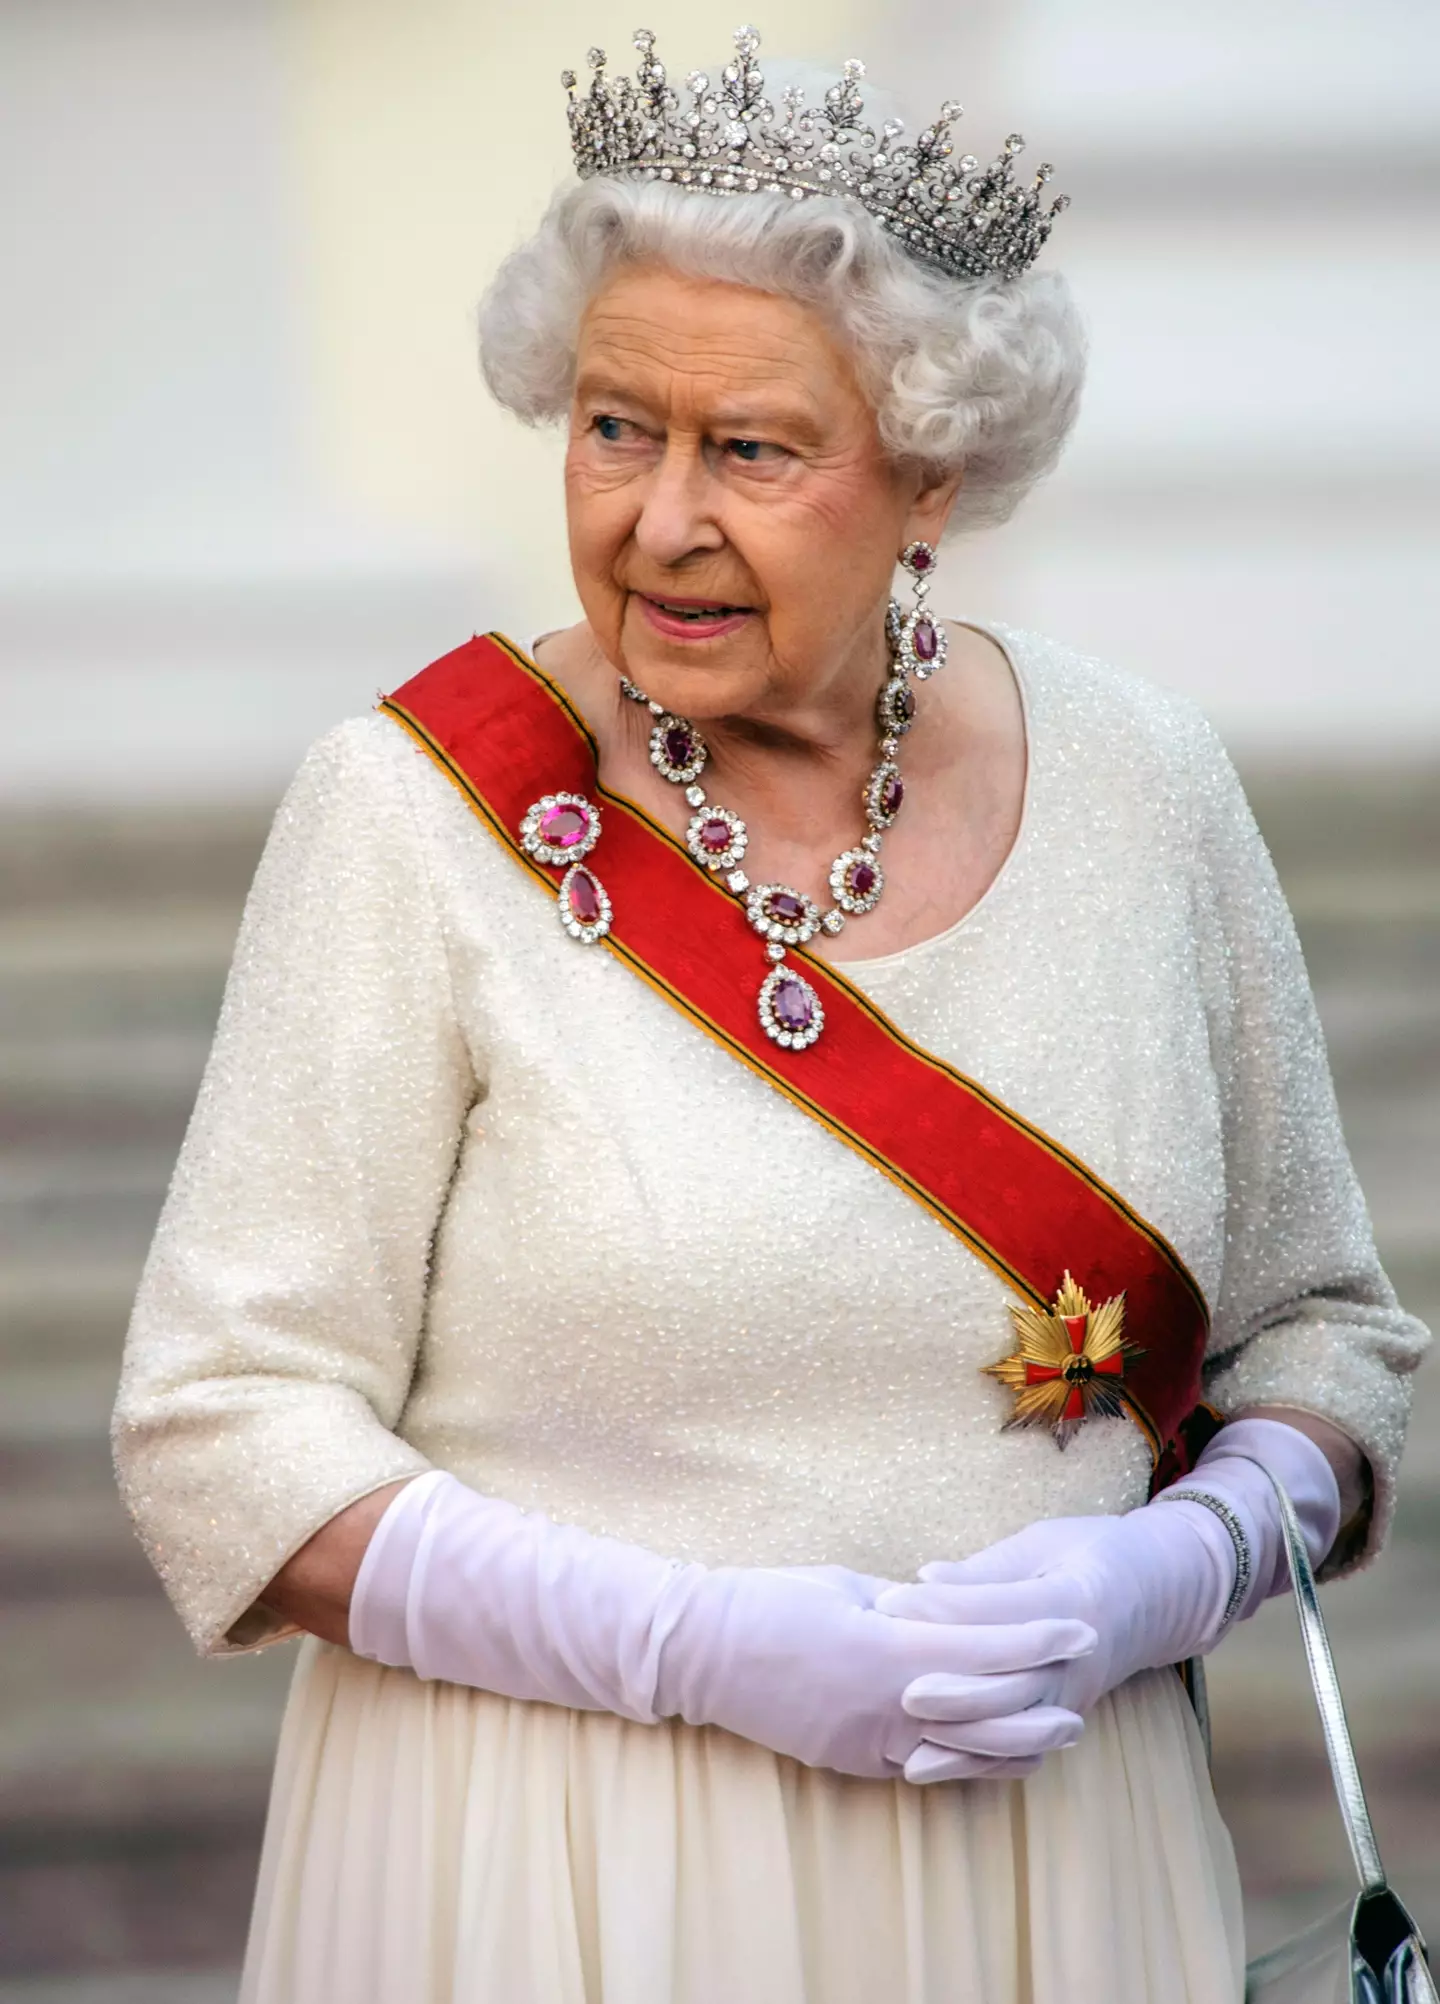 More than 6,000 people have signed a petition calling for one of the late Queen’s diamonds to be returned to South Africa.